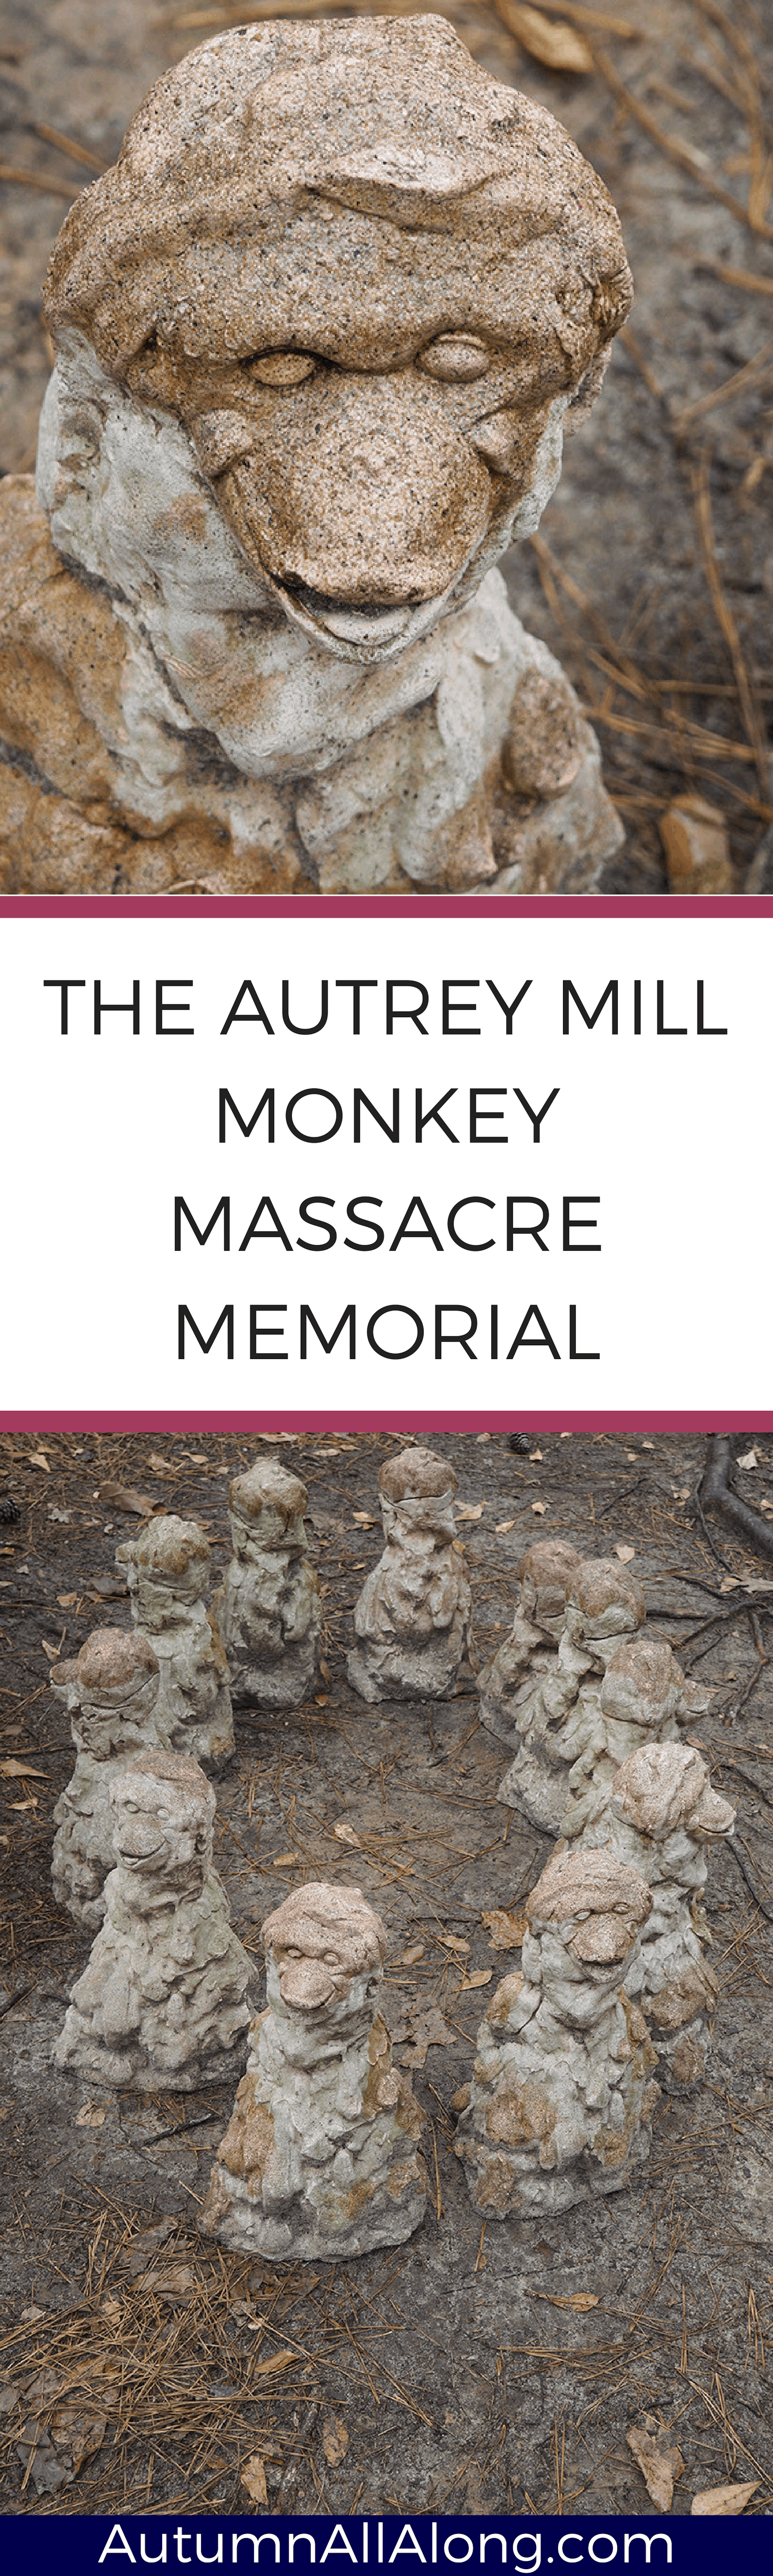 A little guide for the Autrey Mill monkey massacre memorial trail in Georgia | via Autumn All Along